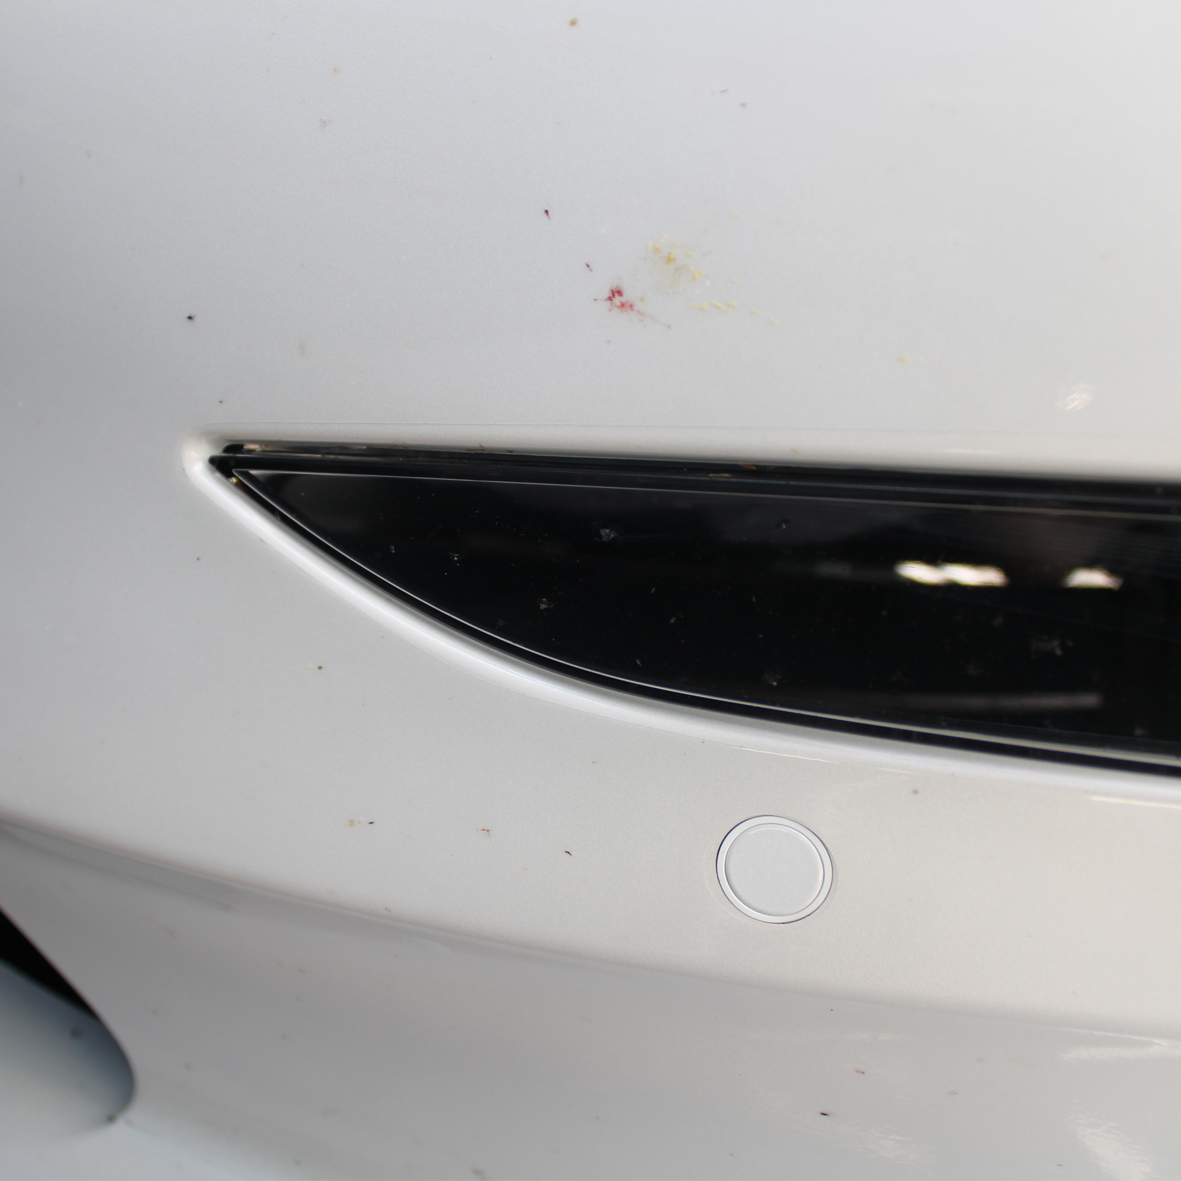 Model 3 Paint Protection Film (PPF) for the front bumper - Tesla